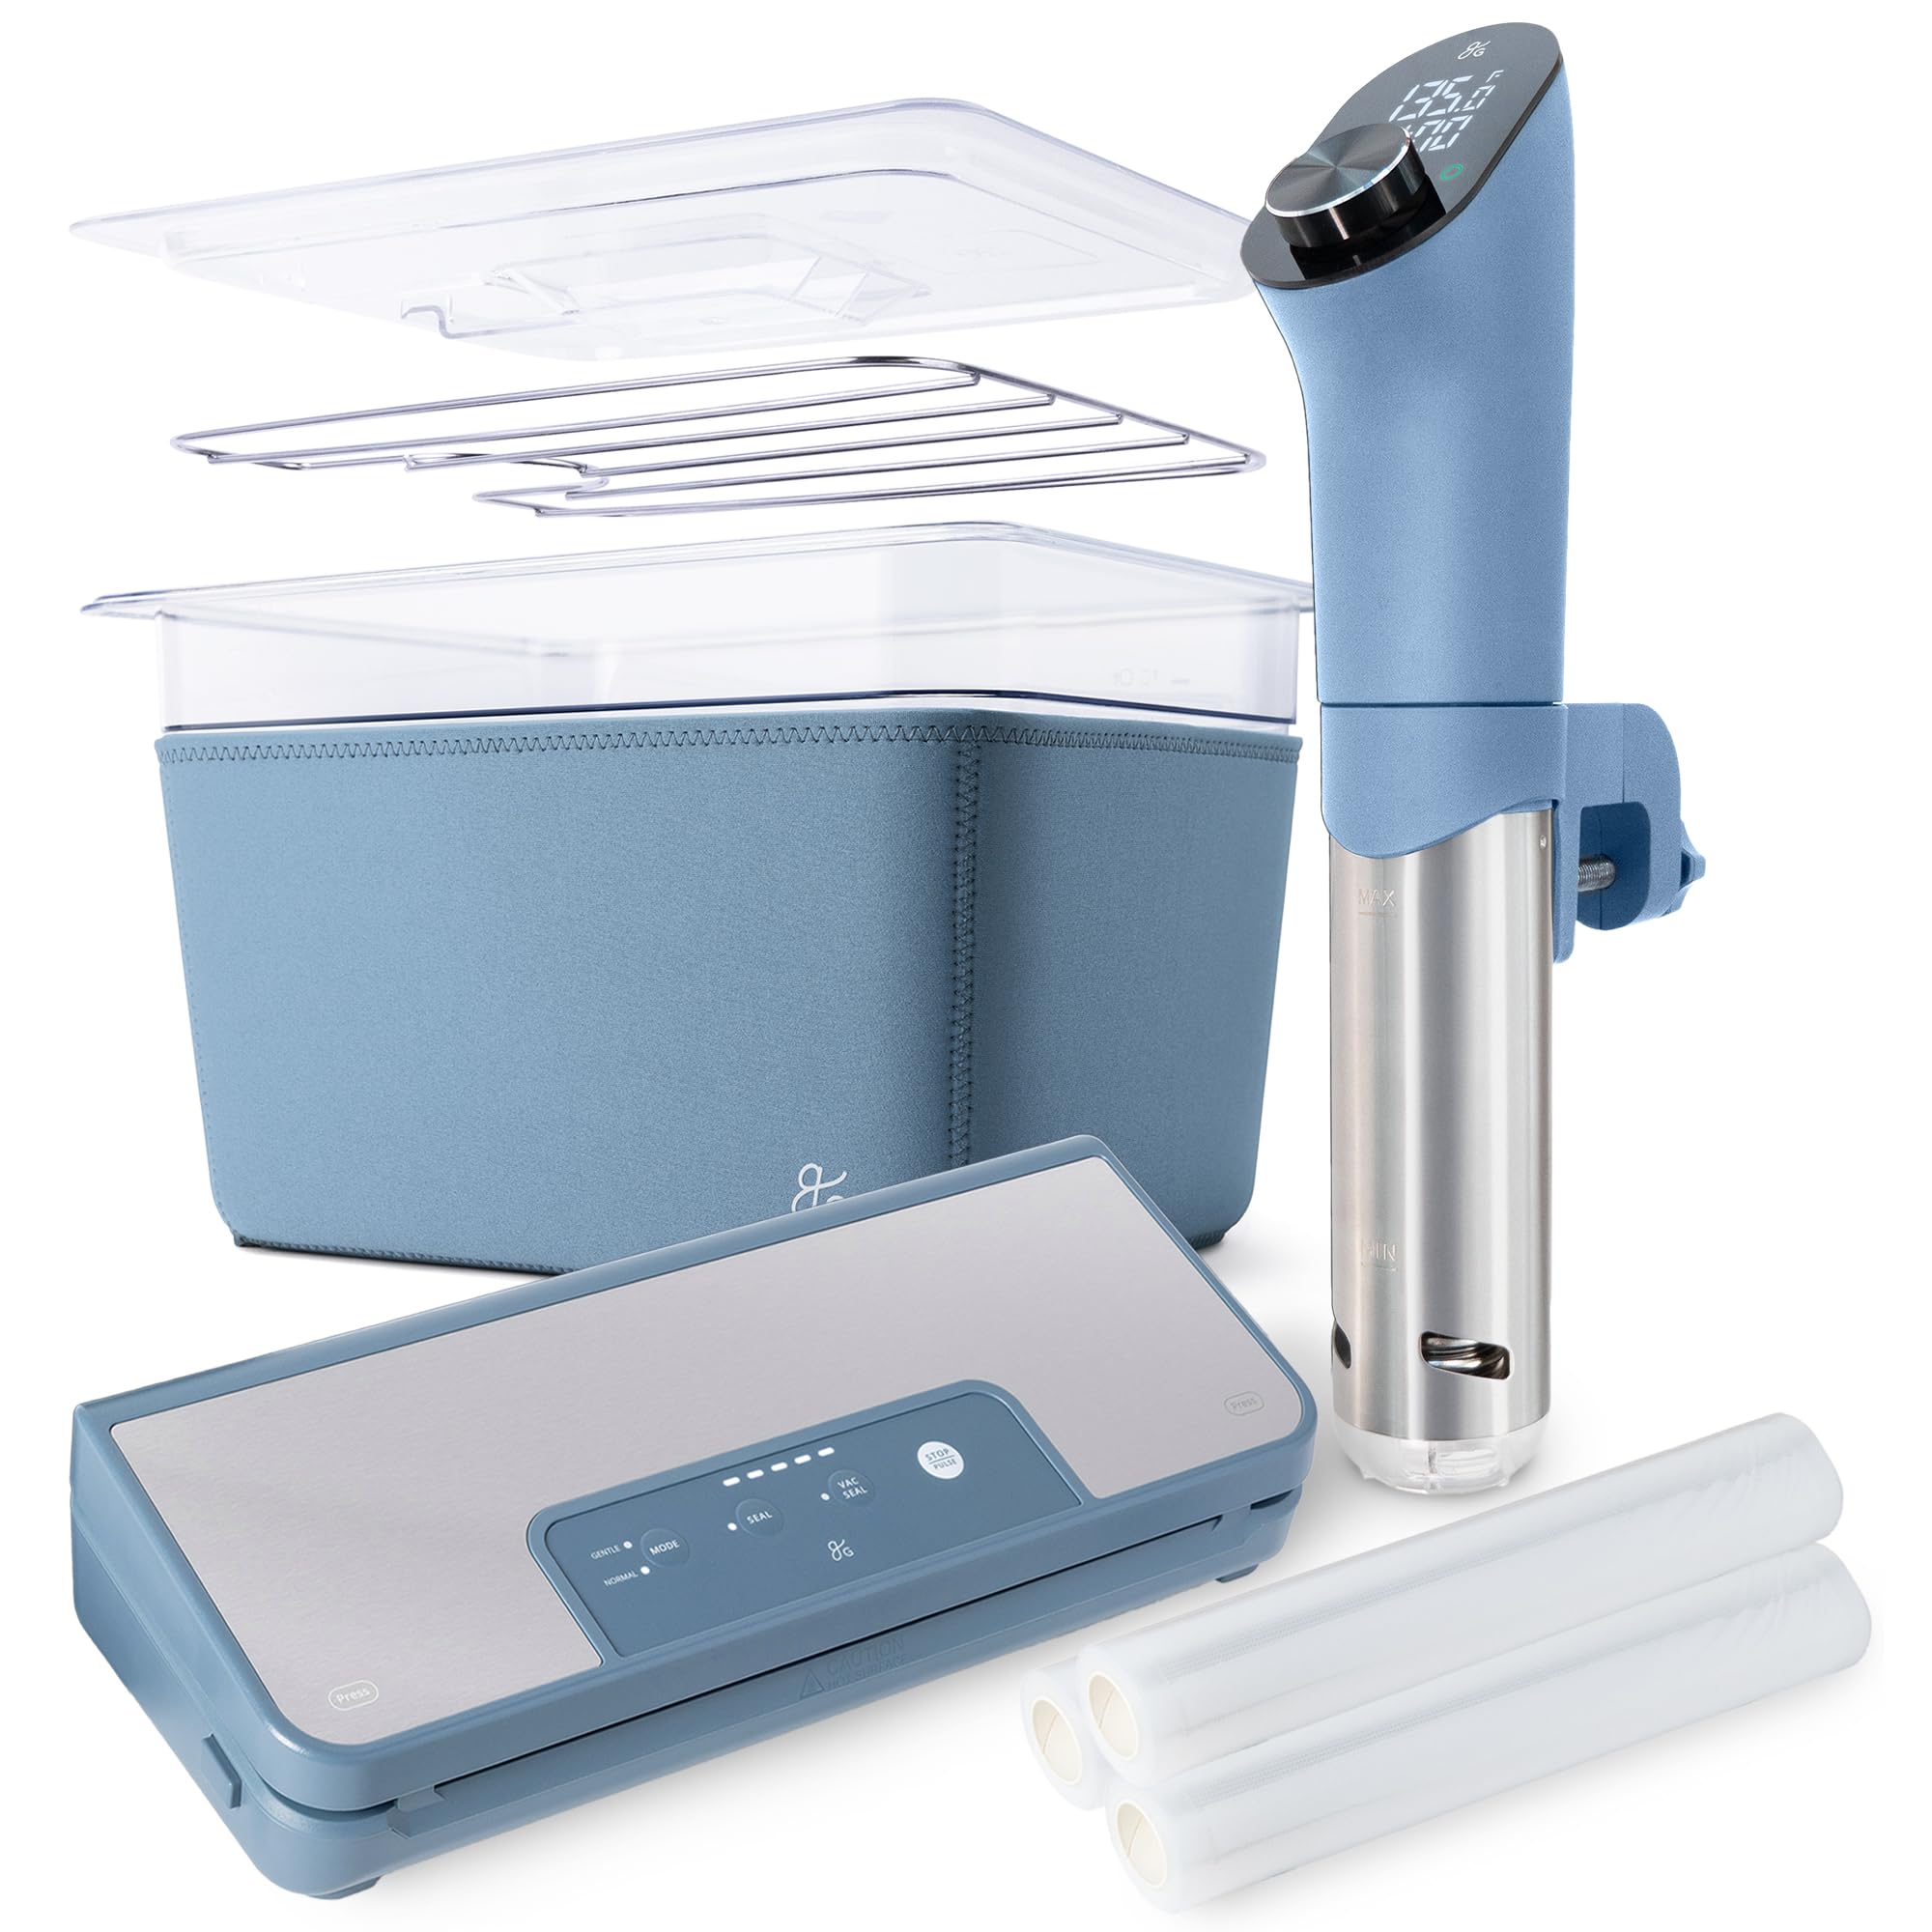 Greater Goods Sous Vide Kit with Sous Vide Cooker, Sous Vide Container, and Vacuum Sealer with 3 Rolls, Designed in St. Louis. Stone Blue.